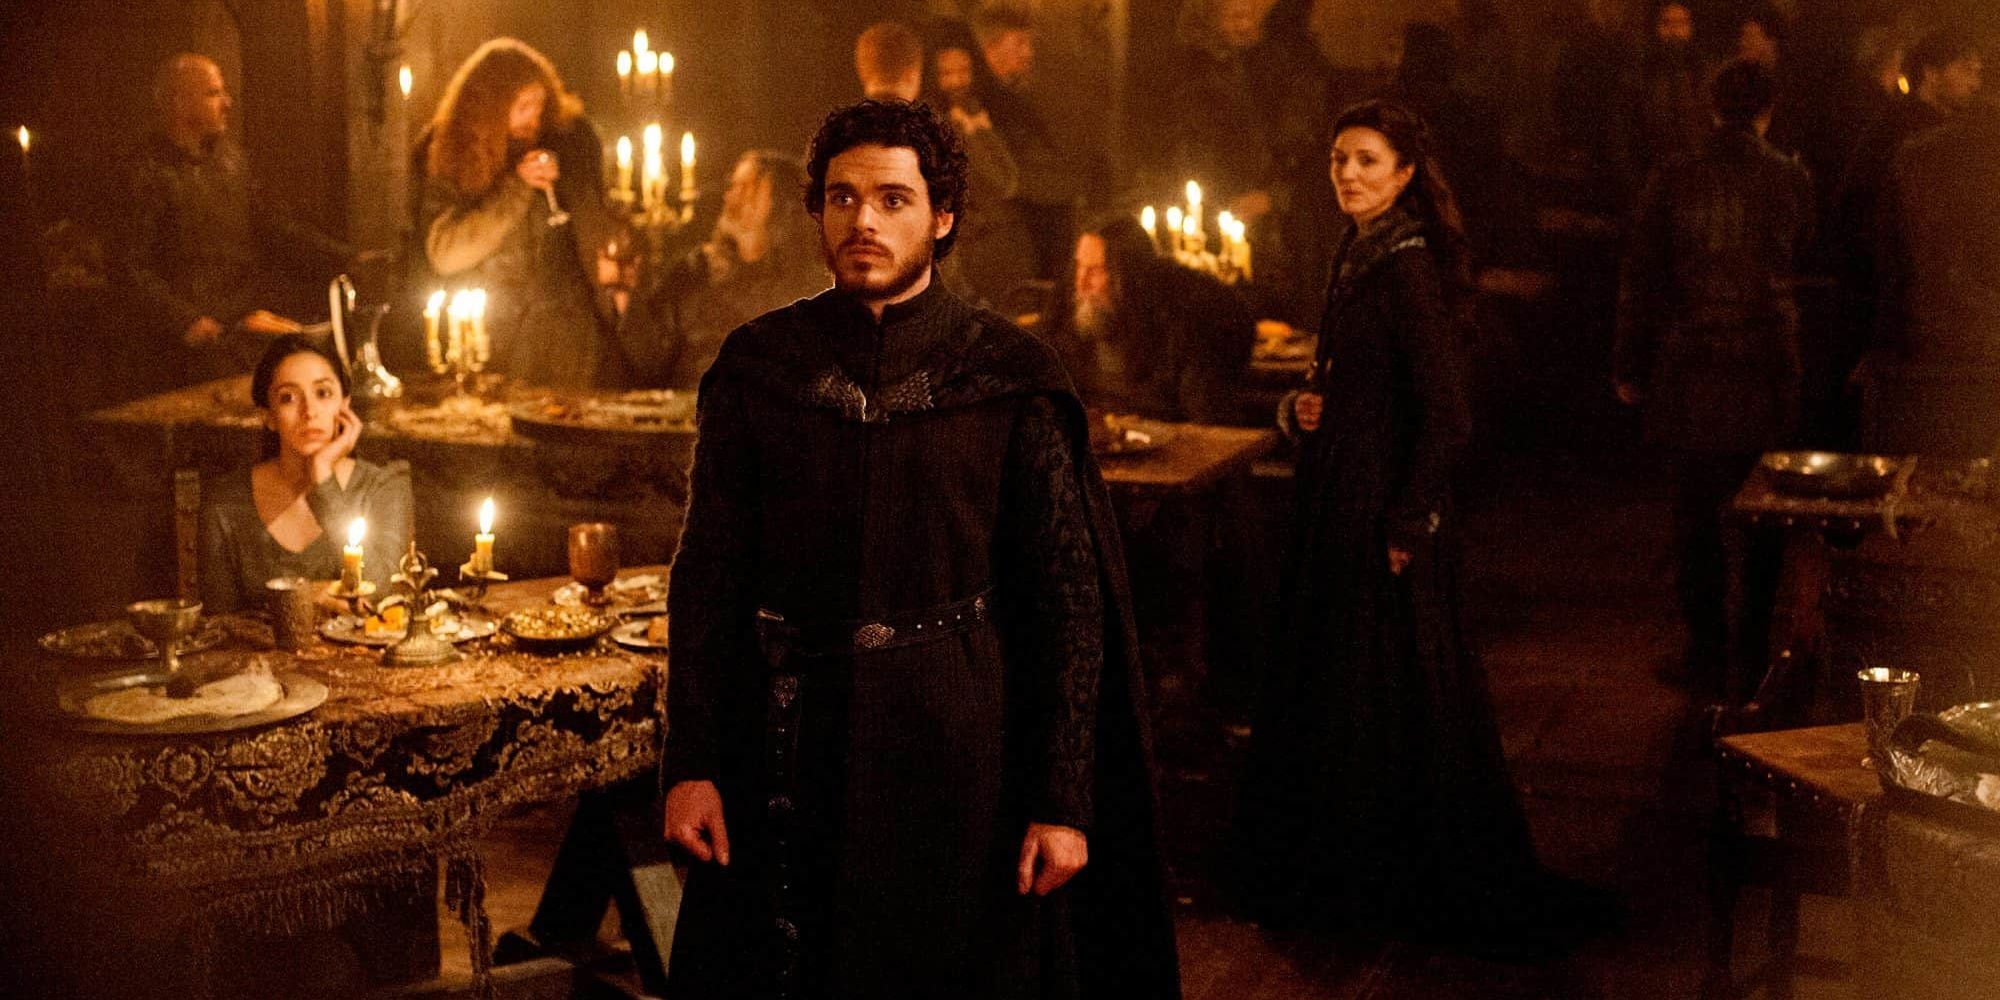 Robb-Stark-in-the-Red-Wedding